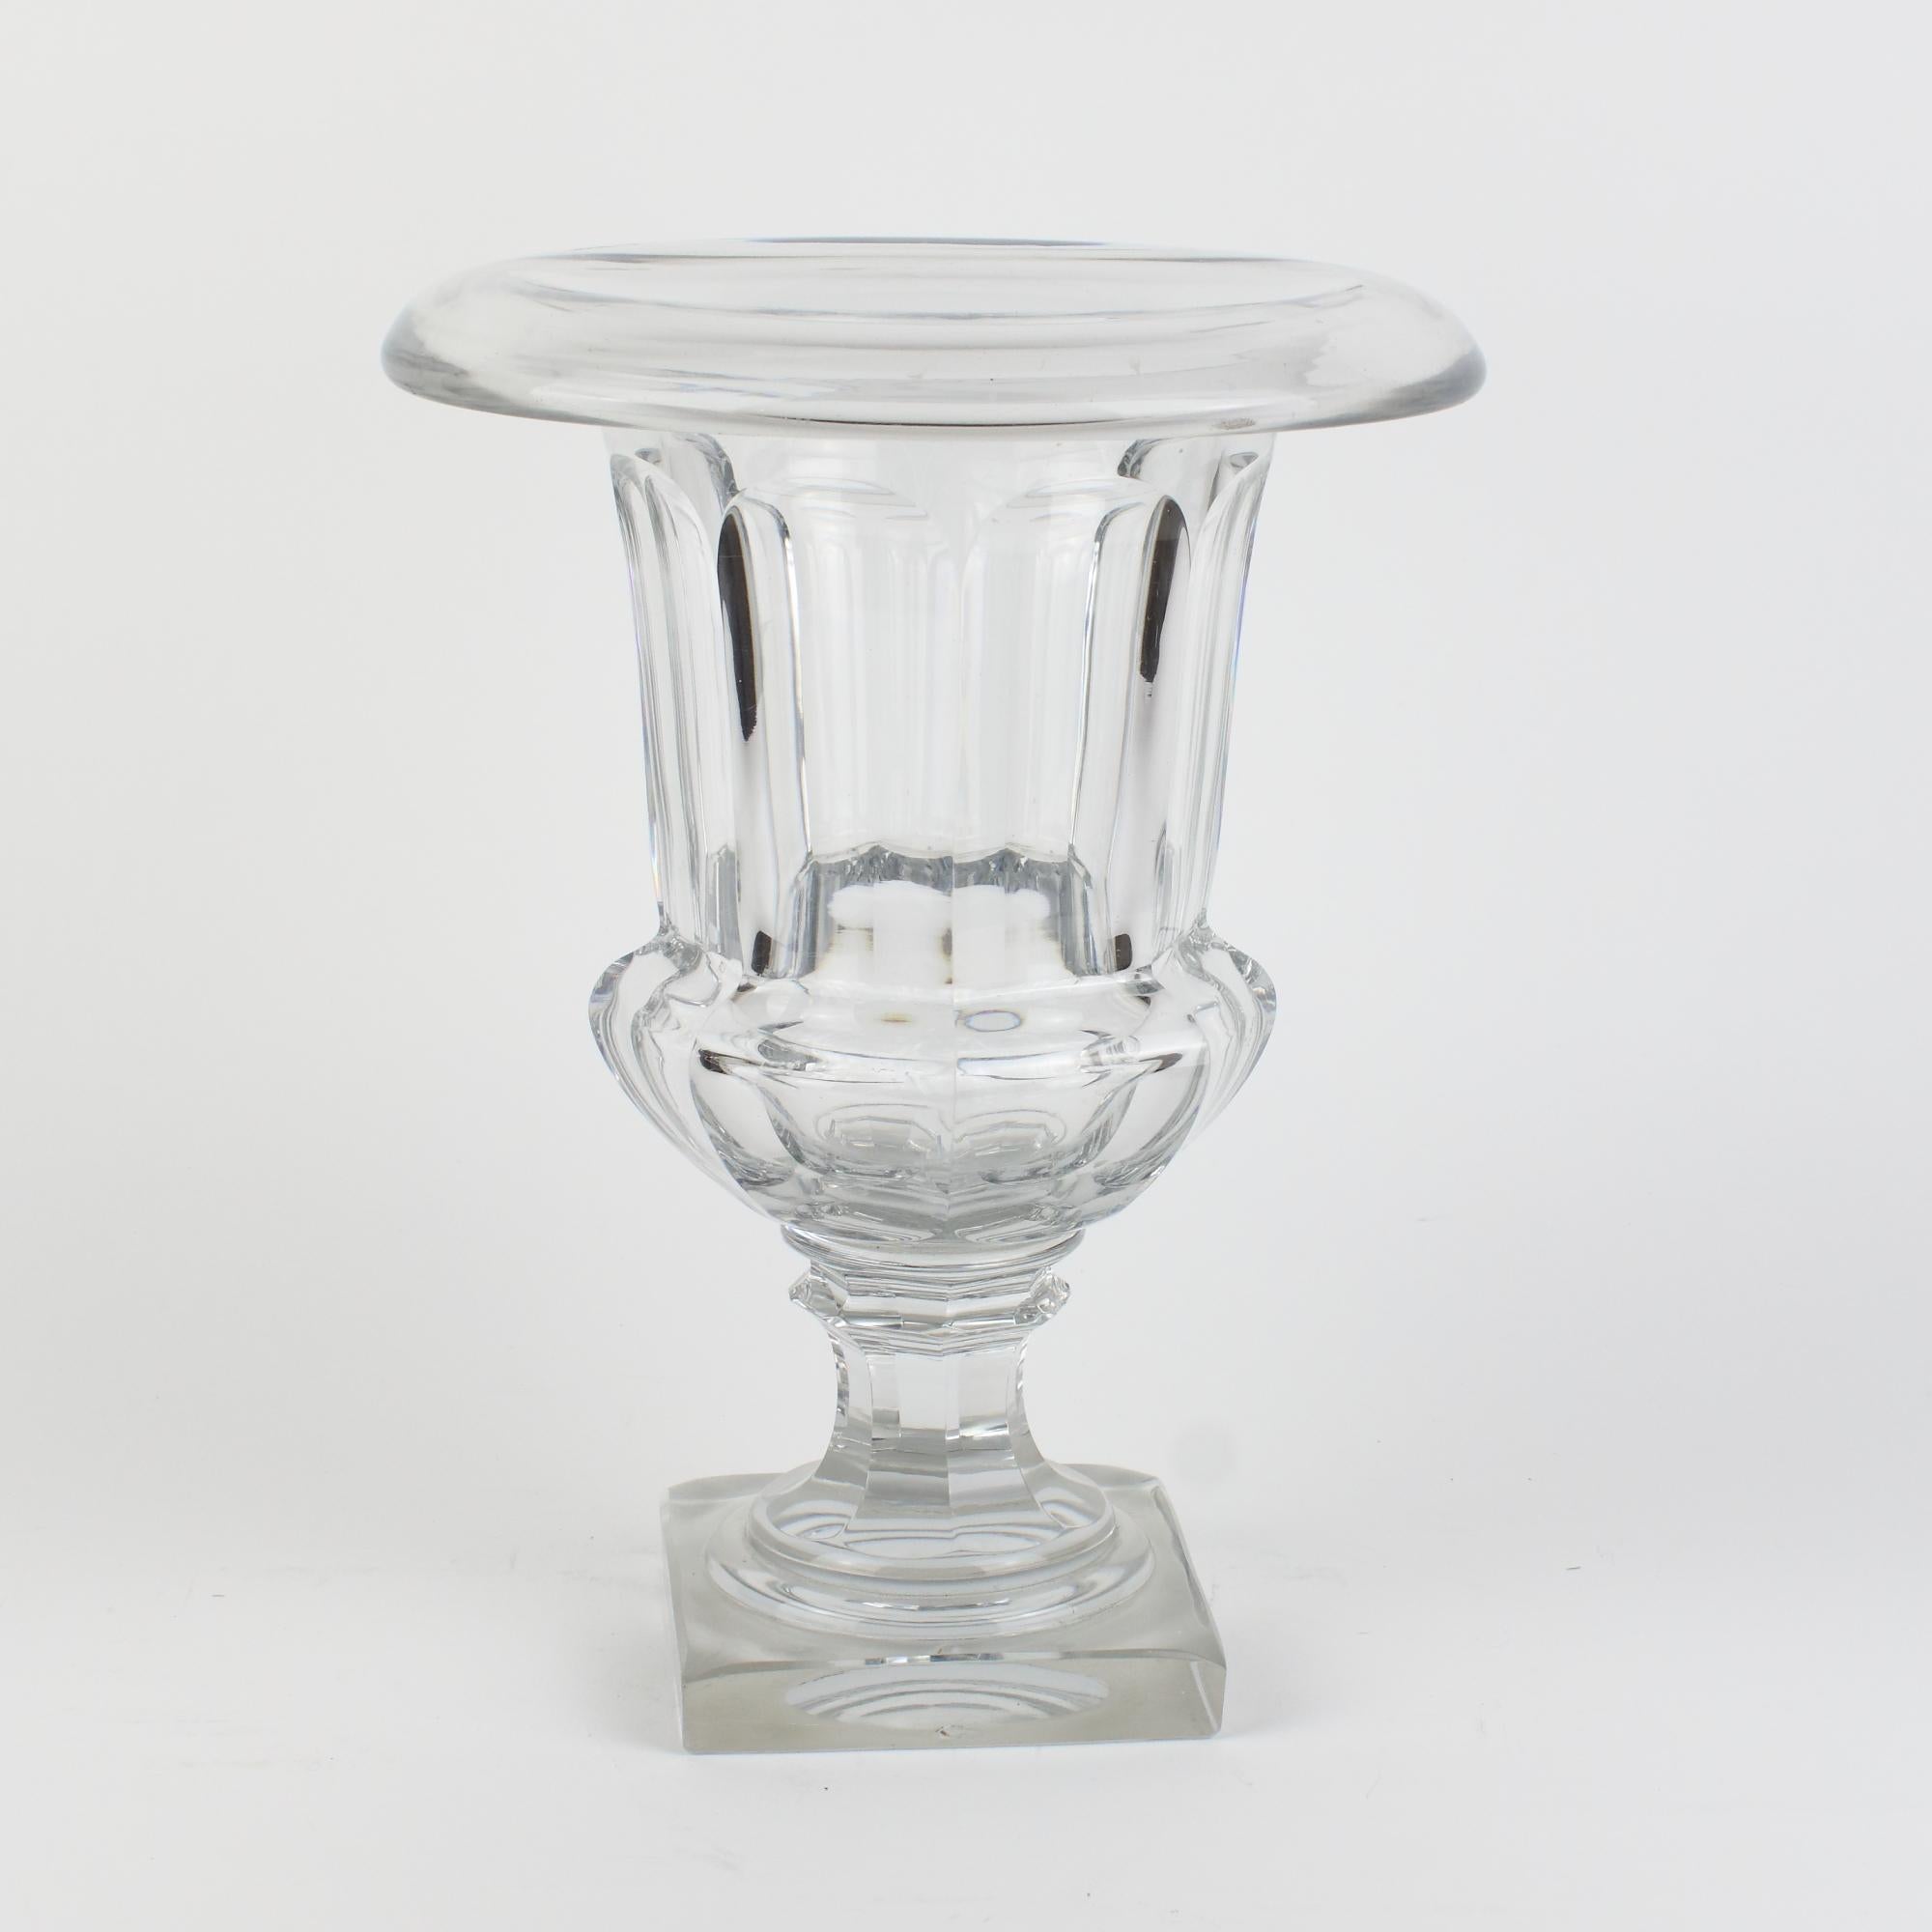 Faceted Early 20th Century Crystal Glass Neoclassical Medici Krater Vase